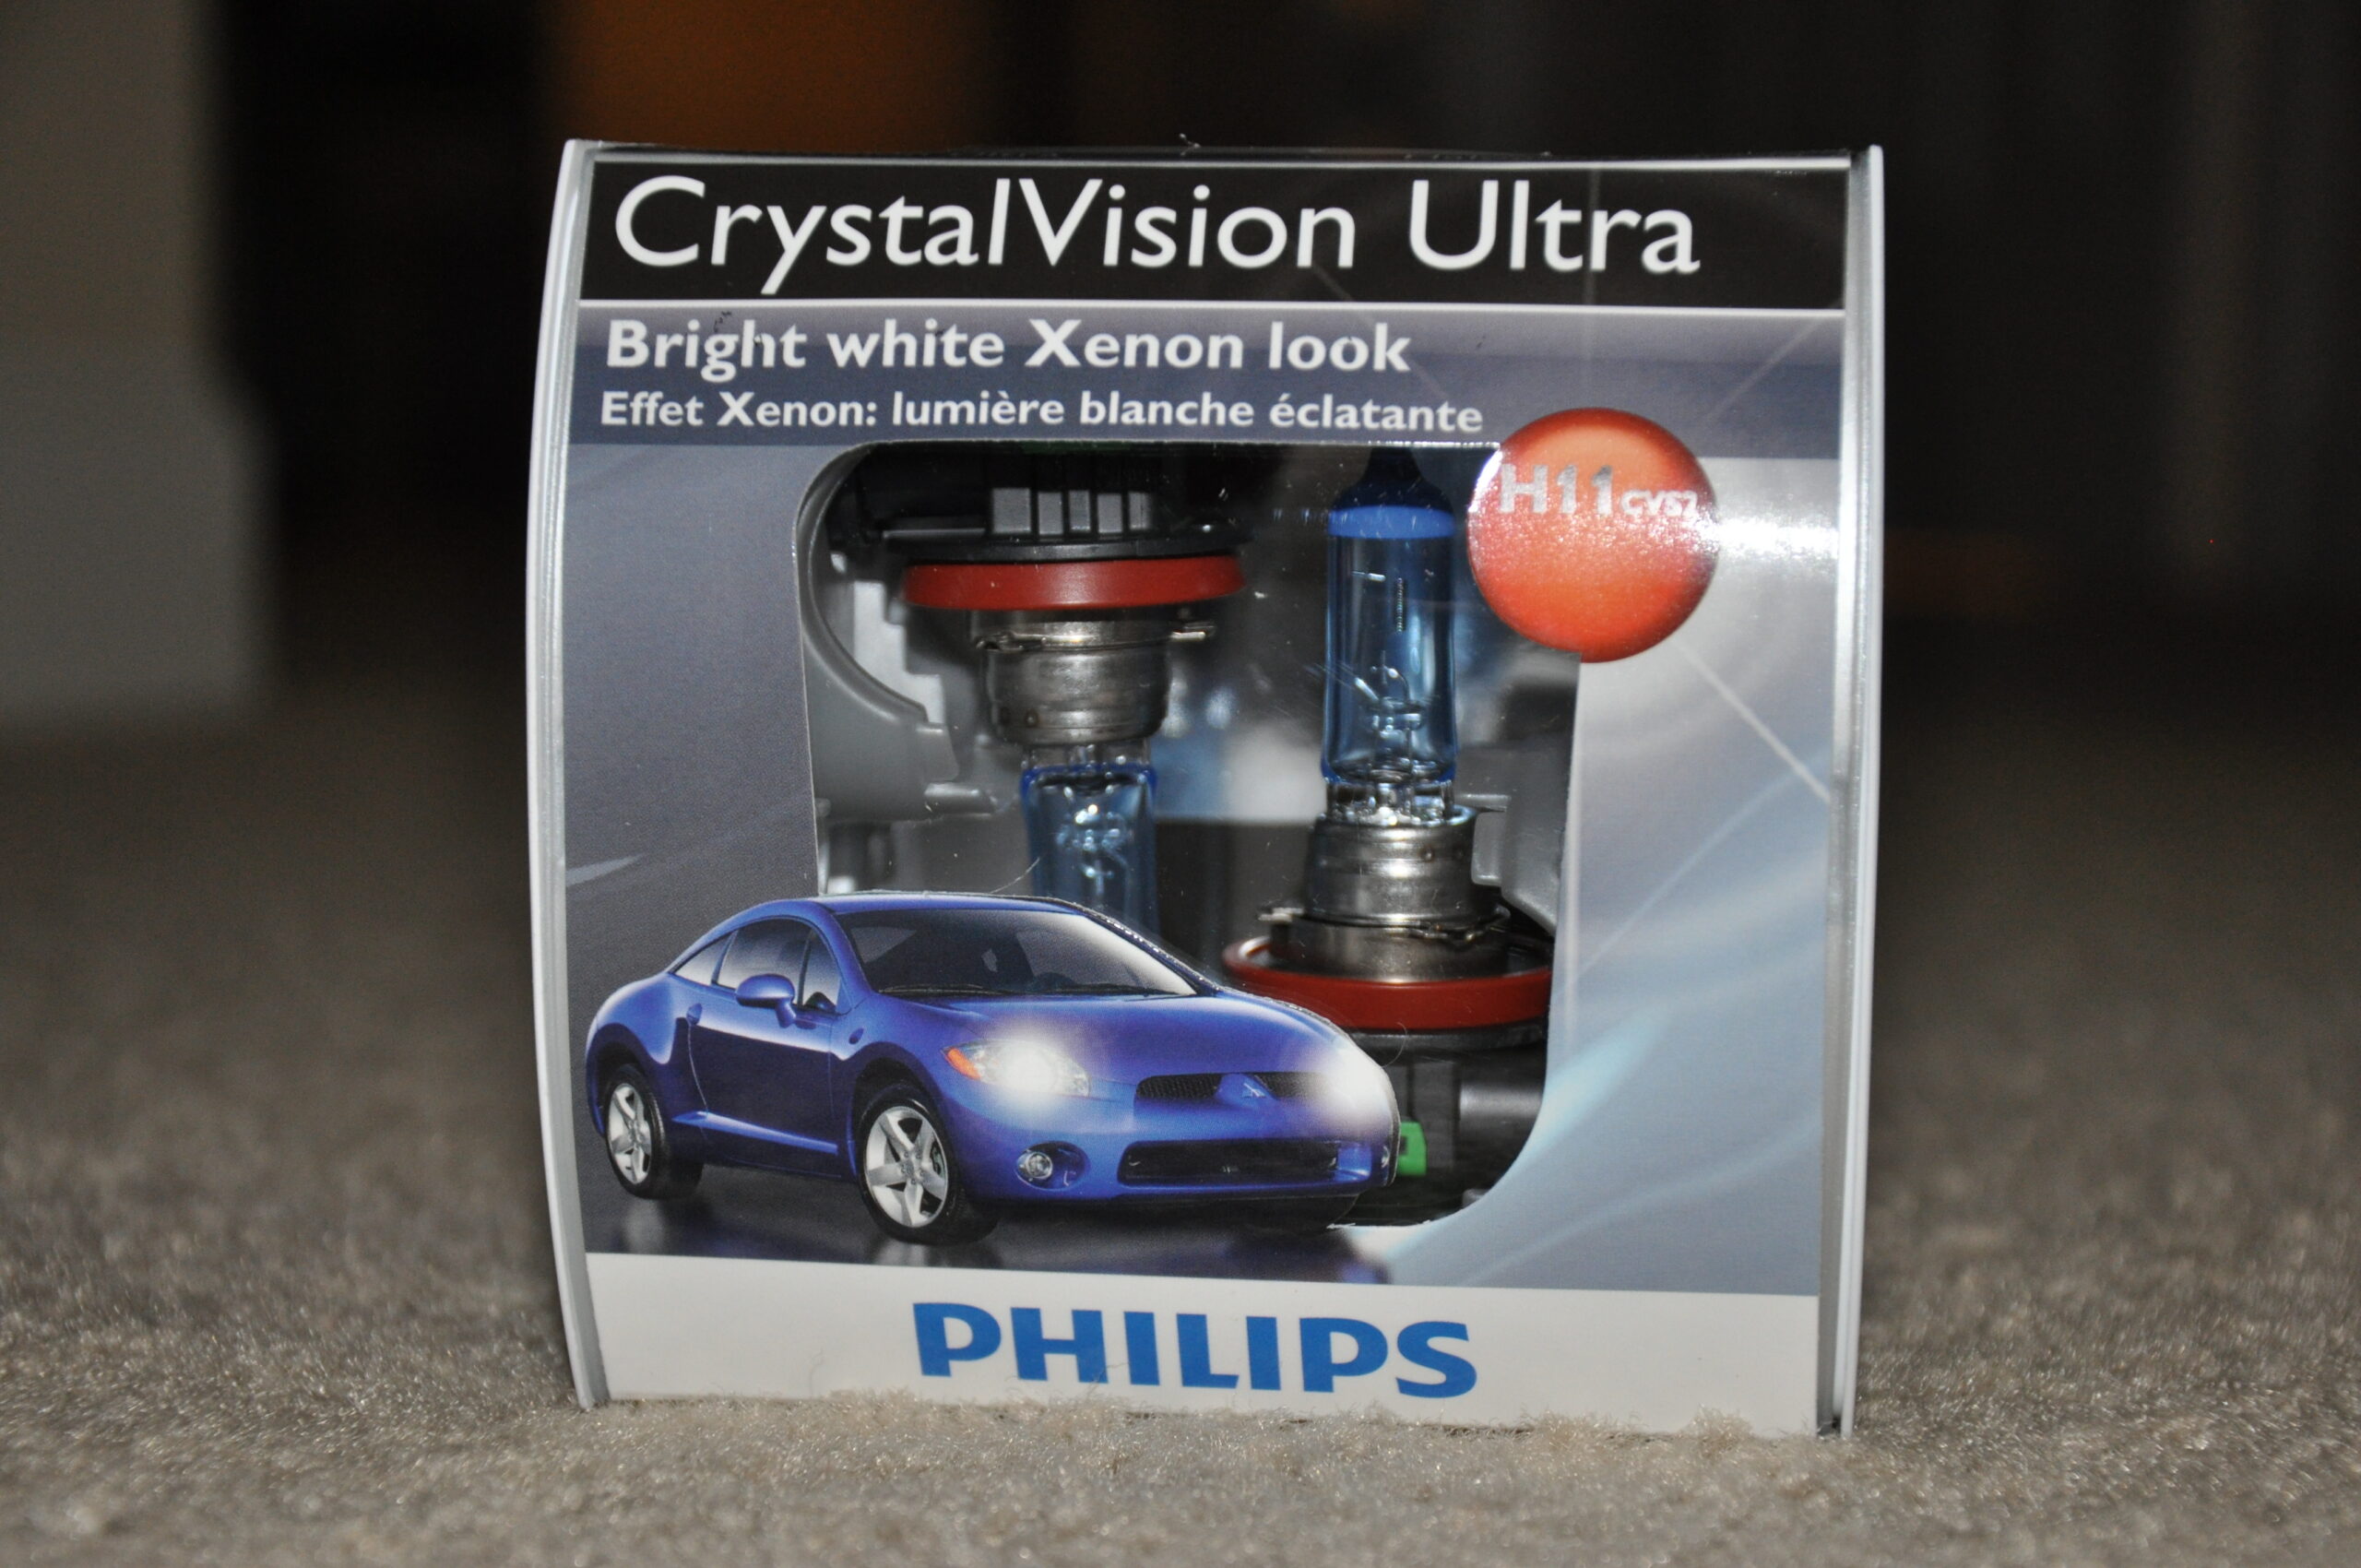 Philips CrystalVision Ultra halogen Headlight Review Philips Car Headlight Packaging